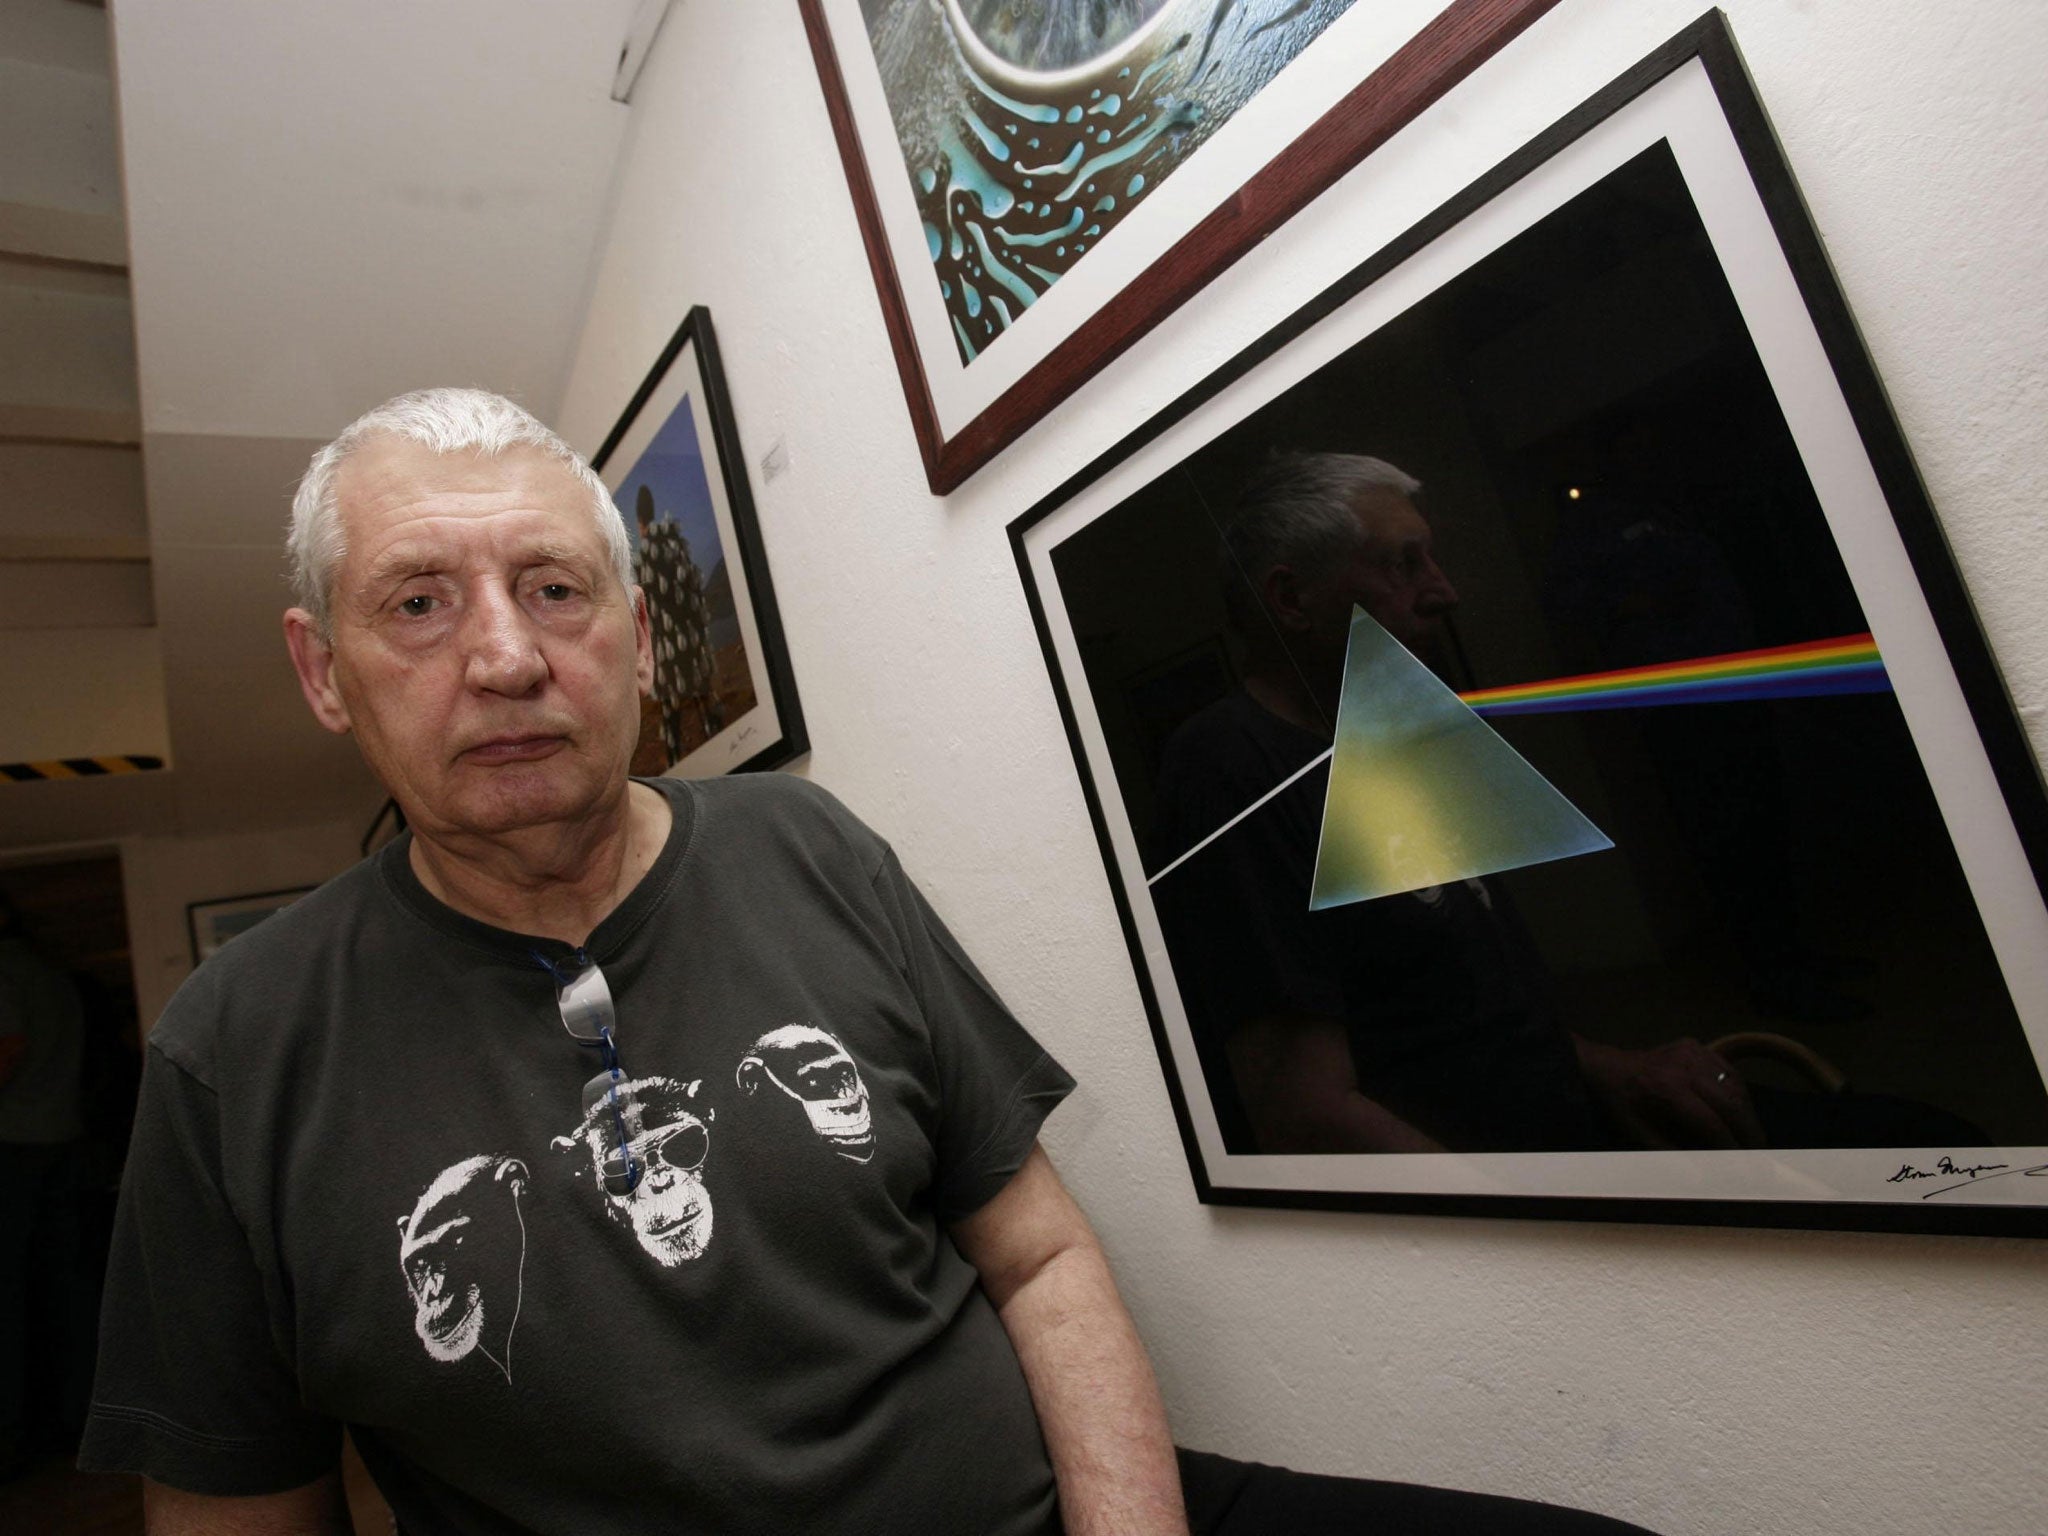 The late Storm Thorgerson with his cover art for ‘Dark Side of the Moon’